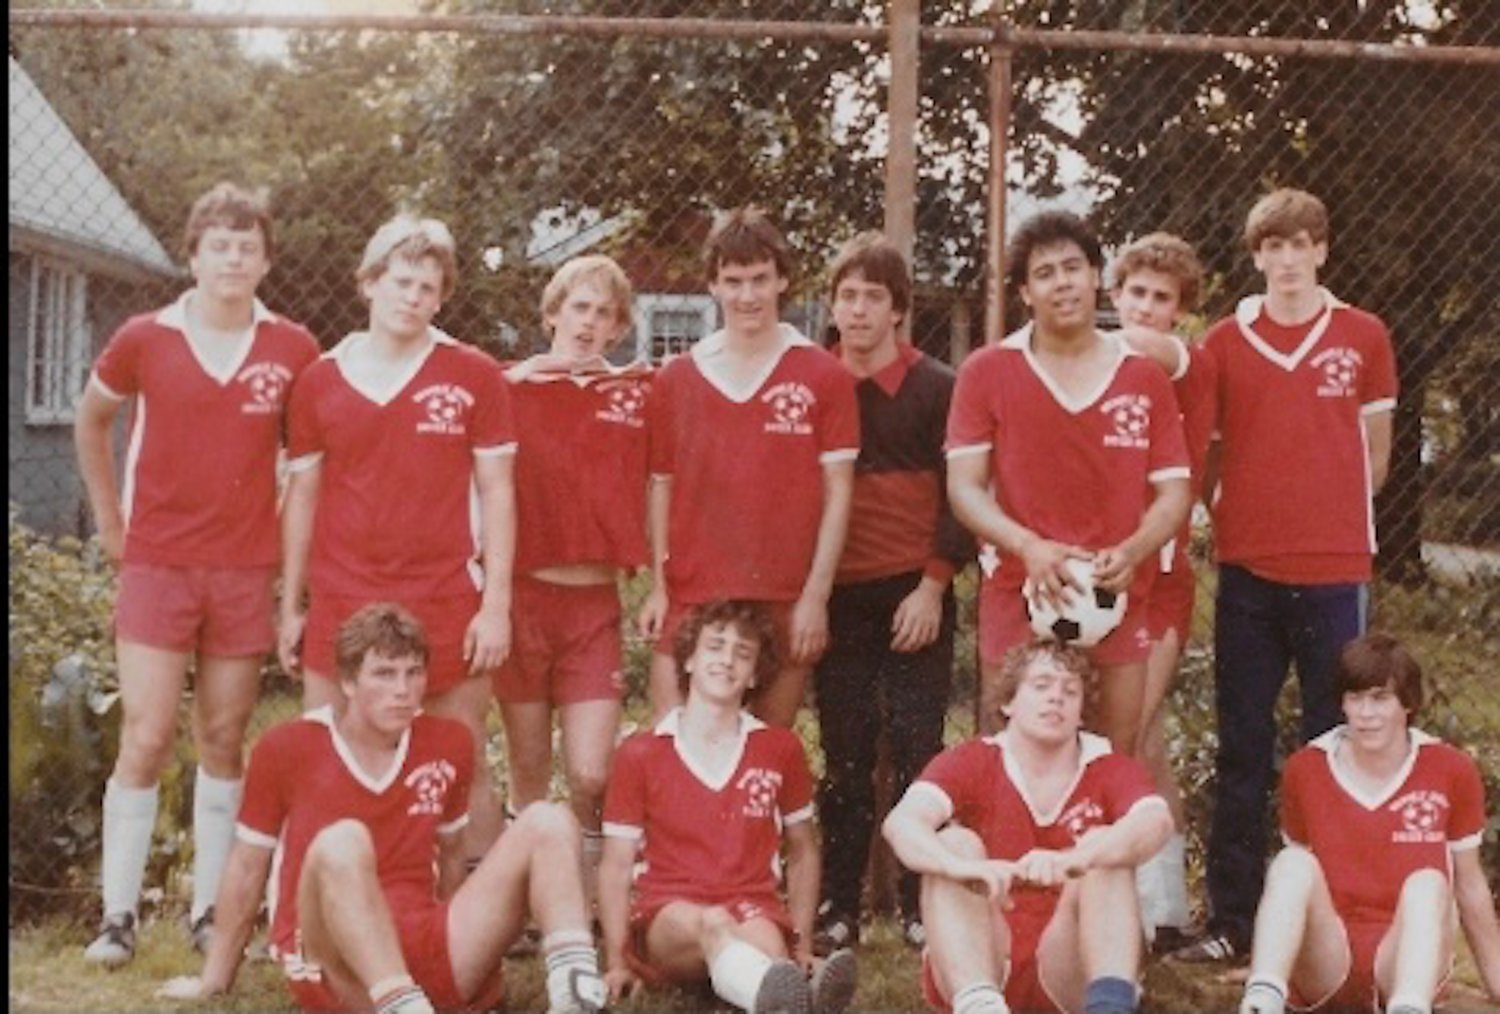 A Rockville Centre Soccer Club team from 1980, above.